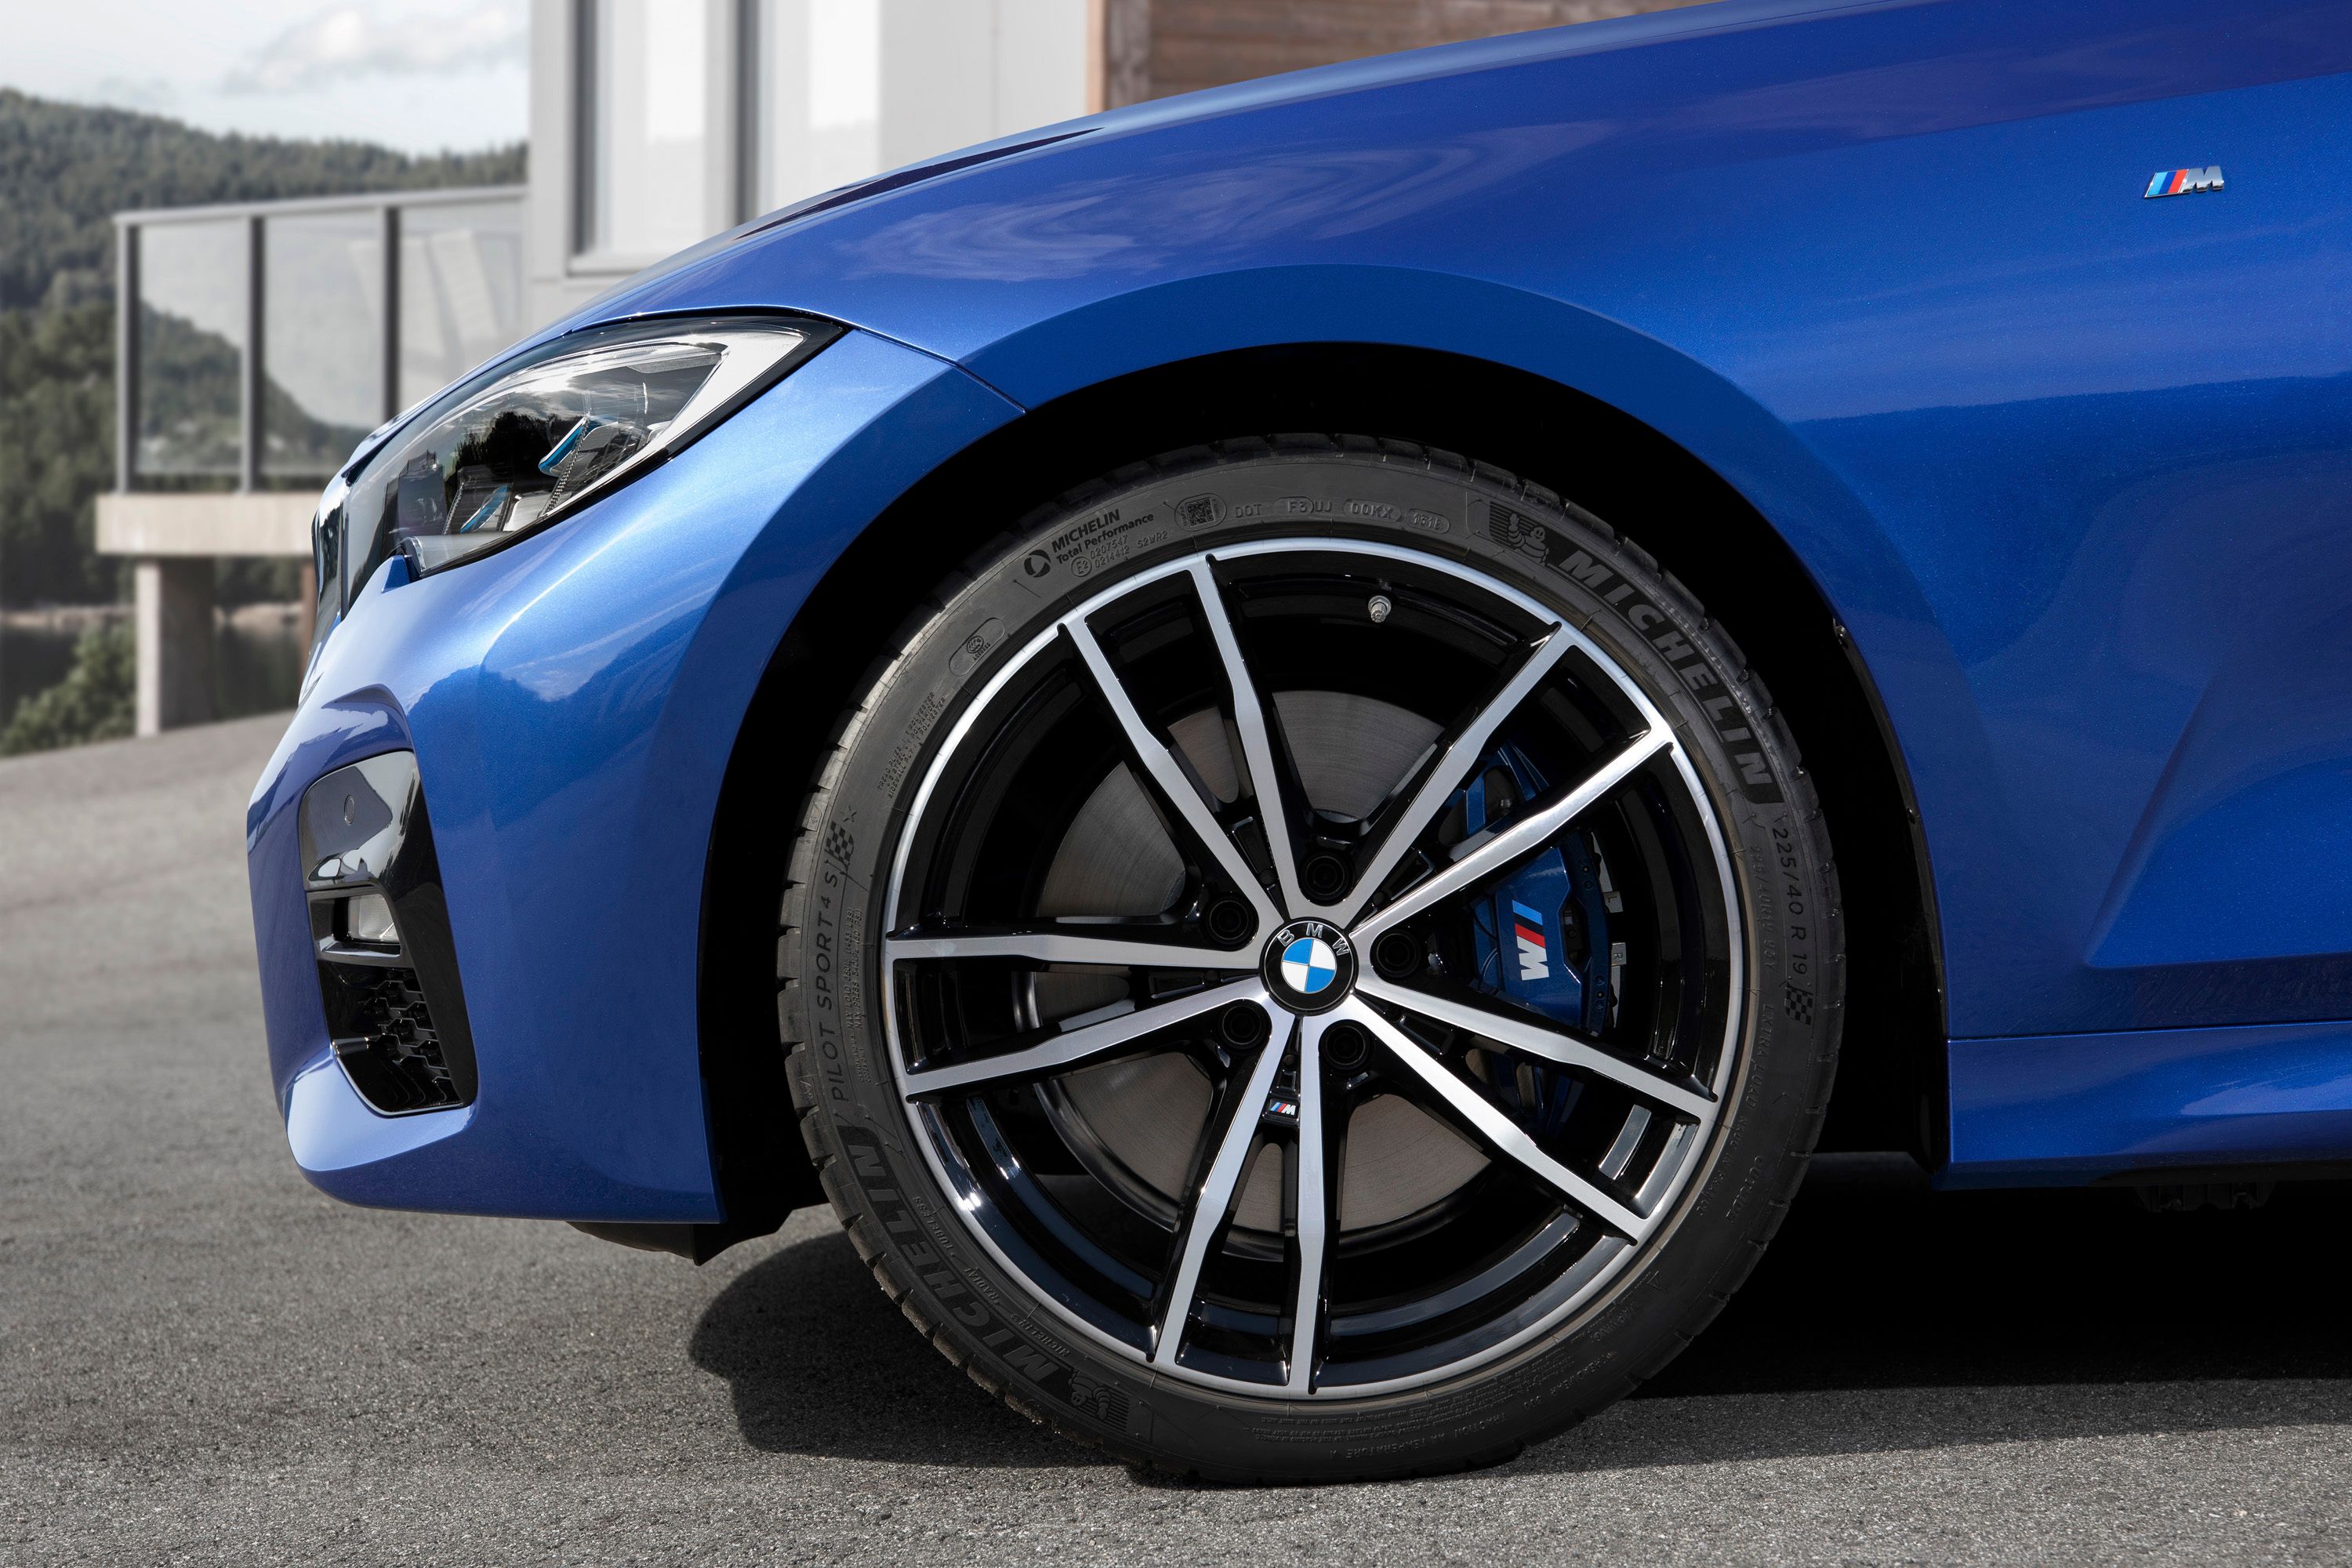 2019 - 2020 Check Out the Self-Aligning Wheel Caps on the 2019 BMW 3 Series